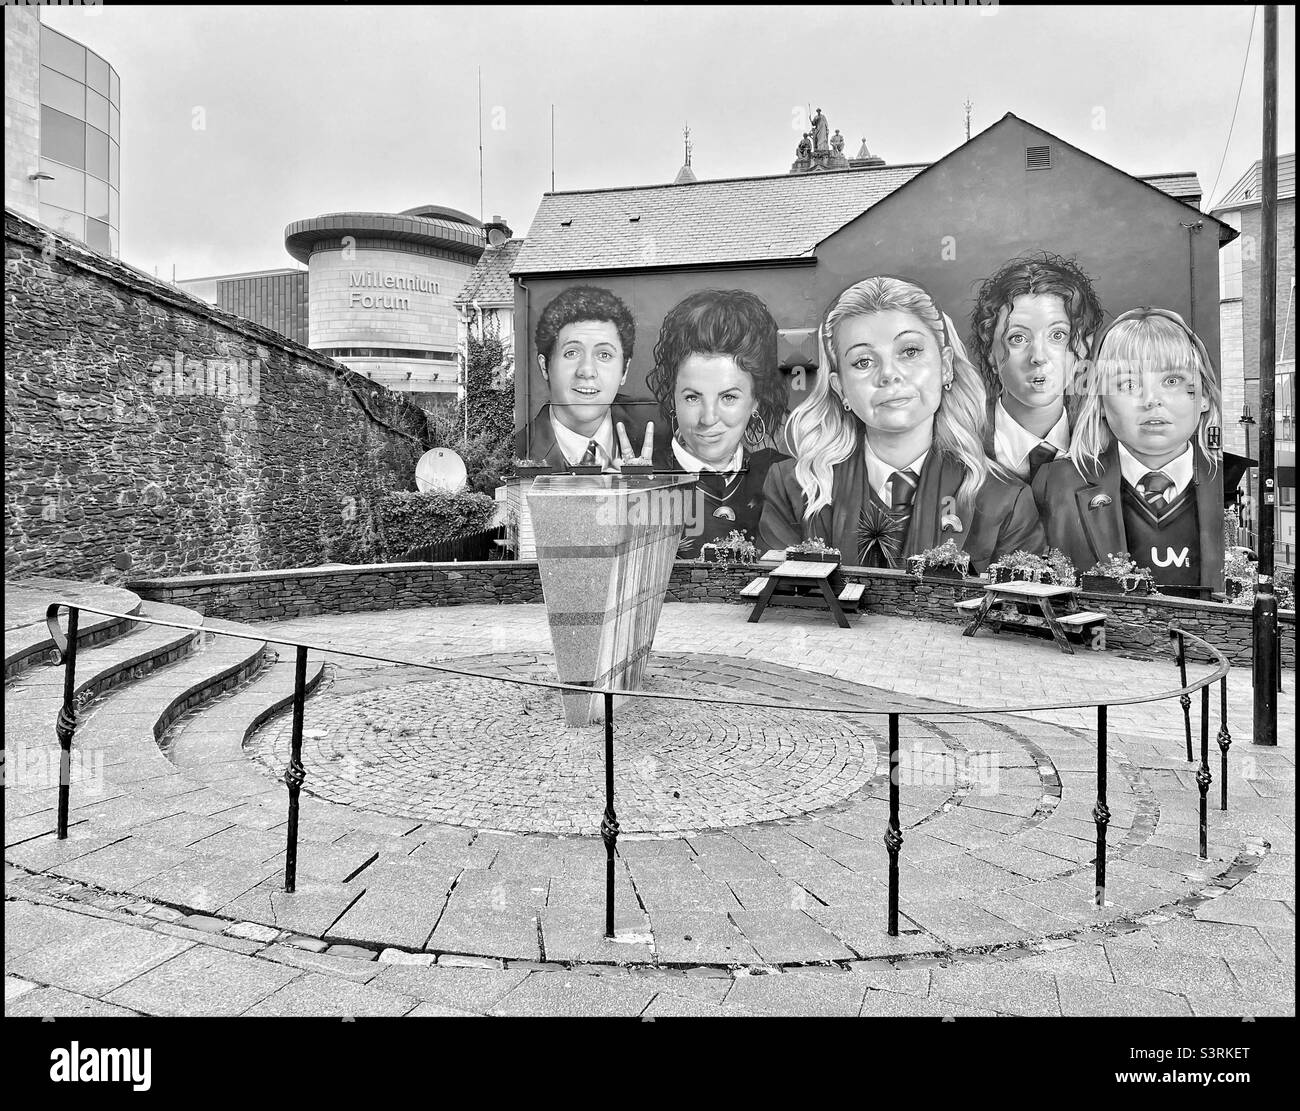 The famous painting of “The Derry Girls” on the wall of Badgers Bar & Restaurant in Derry, N.I. These actors feature one of the most successful UK Channel 4 TV Series of all time. Pic ©️ COLIN HOSKINS Stock Photo